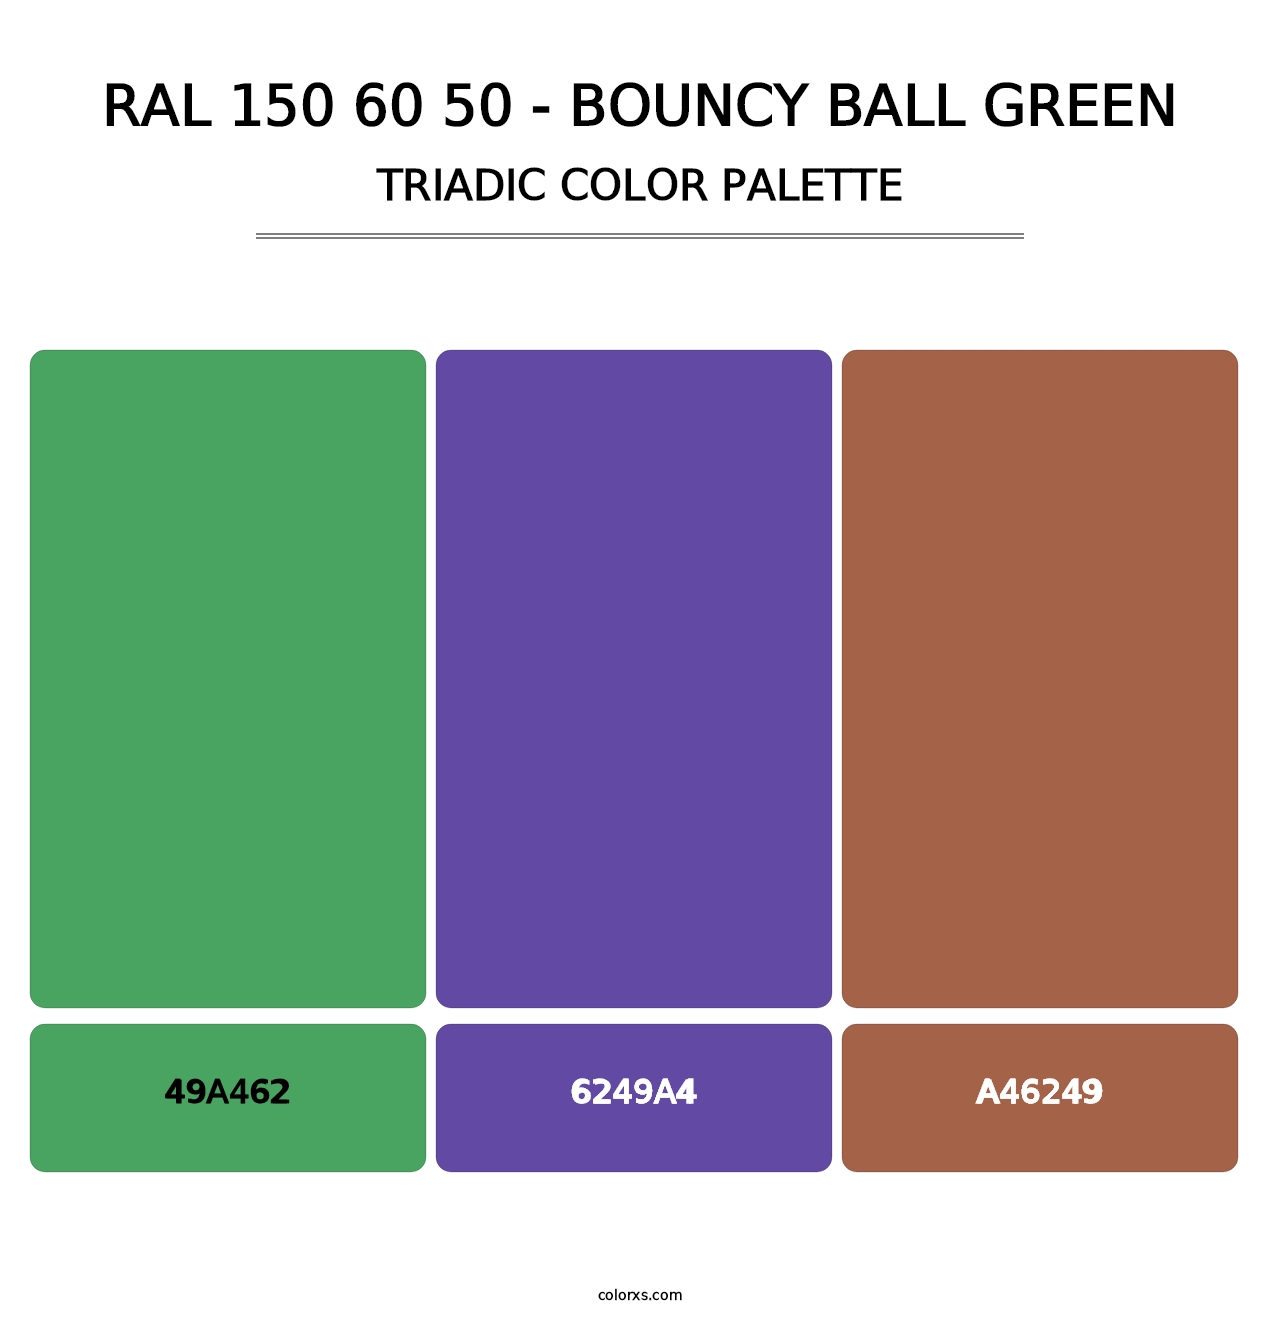 RAL 150 60 50 - Bouncy Ball Green - Triadic Color Palette